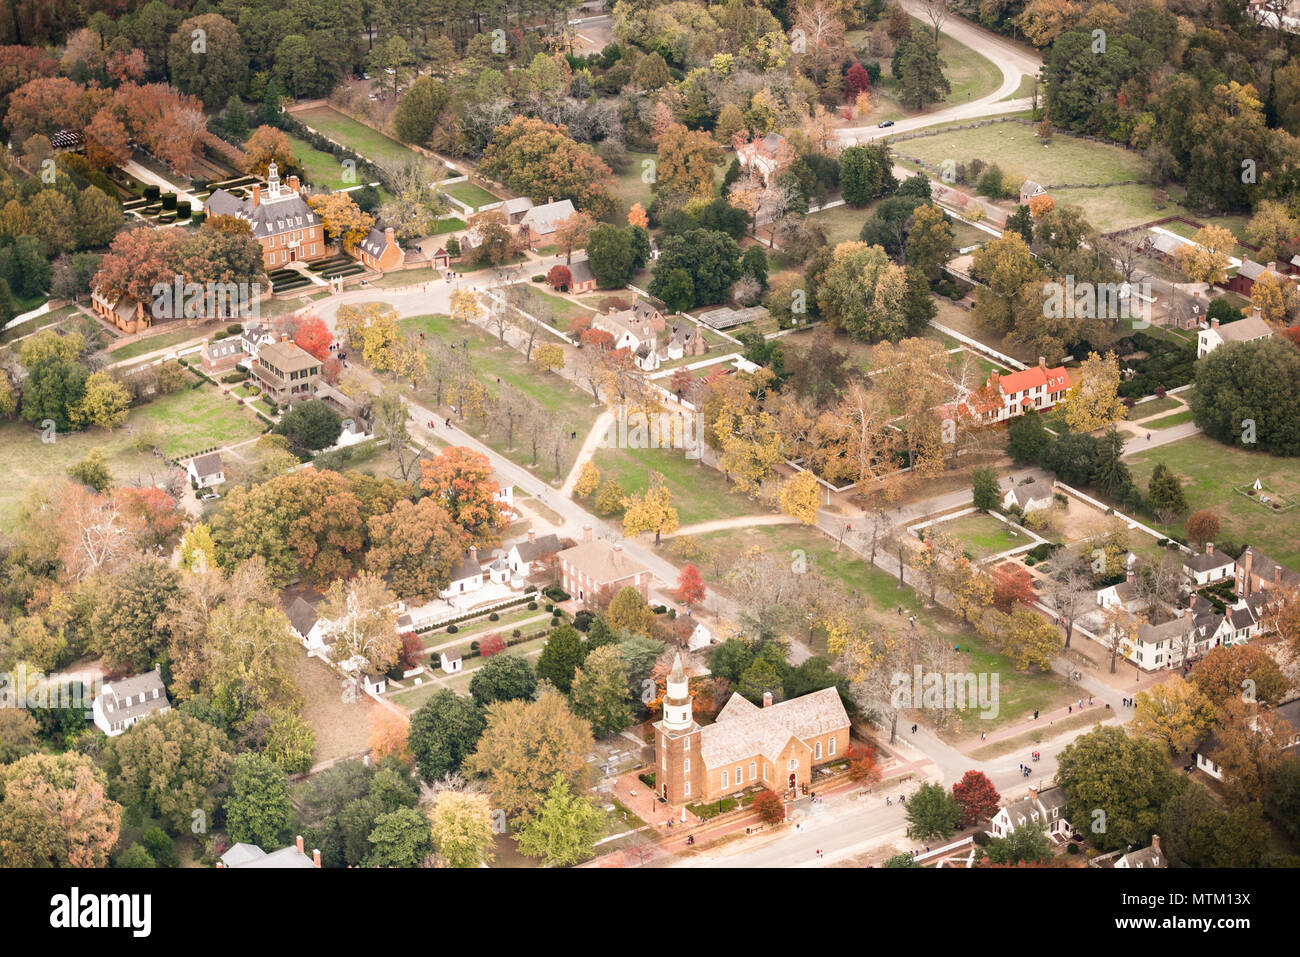 Aerial view of Colonial Williamsburg showing the Governor's Palace